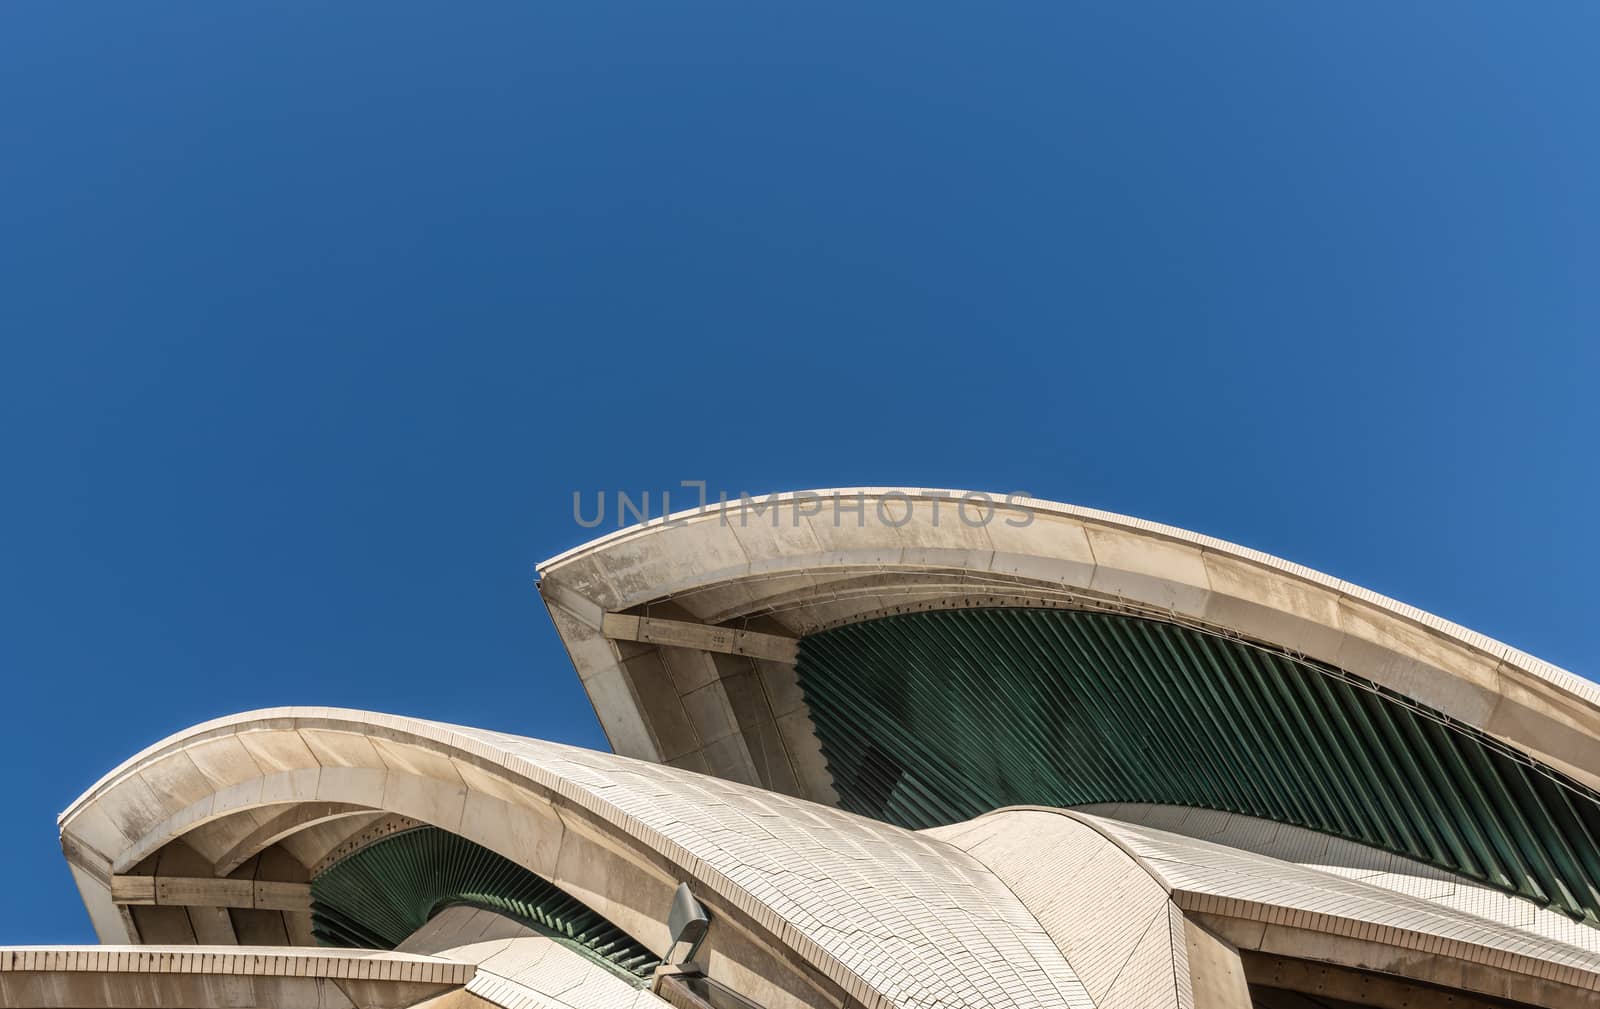 Detail of white roof structure of Sydney Opera House, Australia. by Claudine